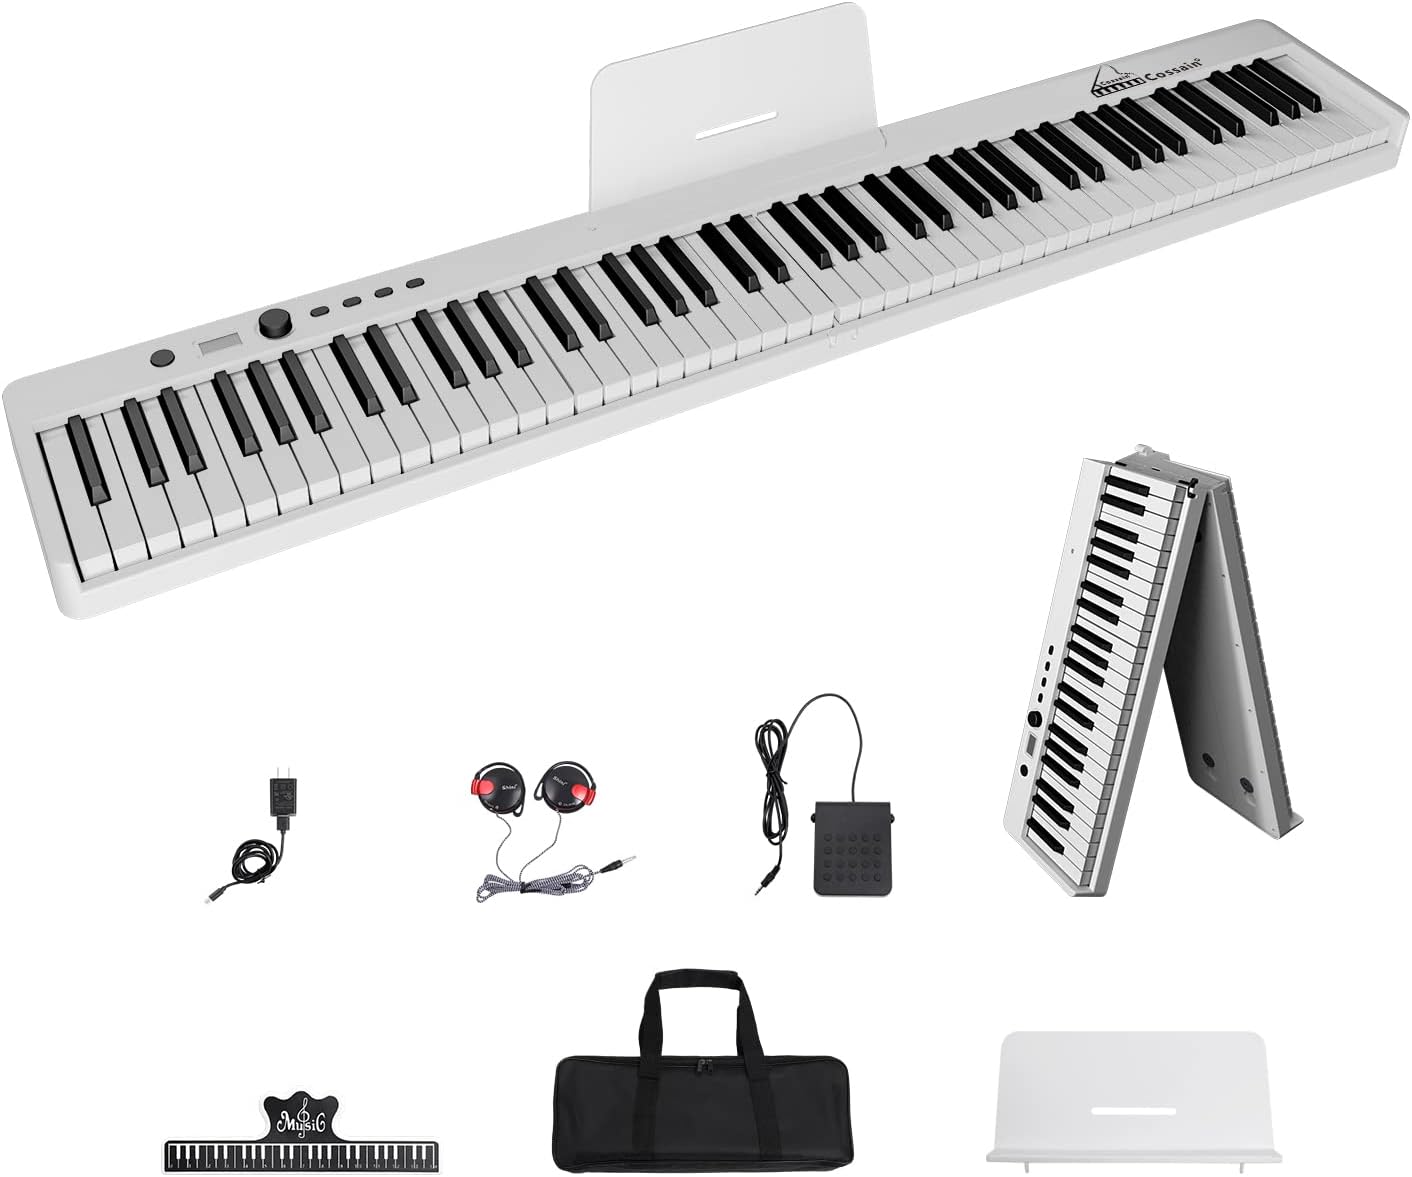 Cossain 88 Key Digital Piano, Folding Piano Keyboard [Full Size/Semi-Weighted/Touch Sensitive] Portable Piano with Piano Bag, [Bluetooth MIDI] Electric Piano Keyboard for Beginners, Teens, Adult